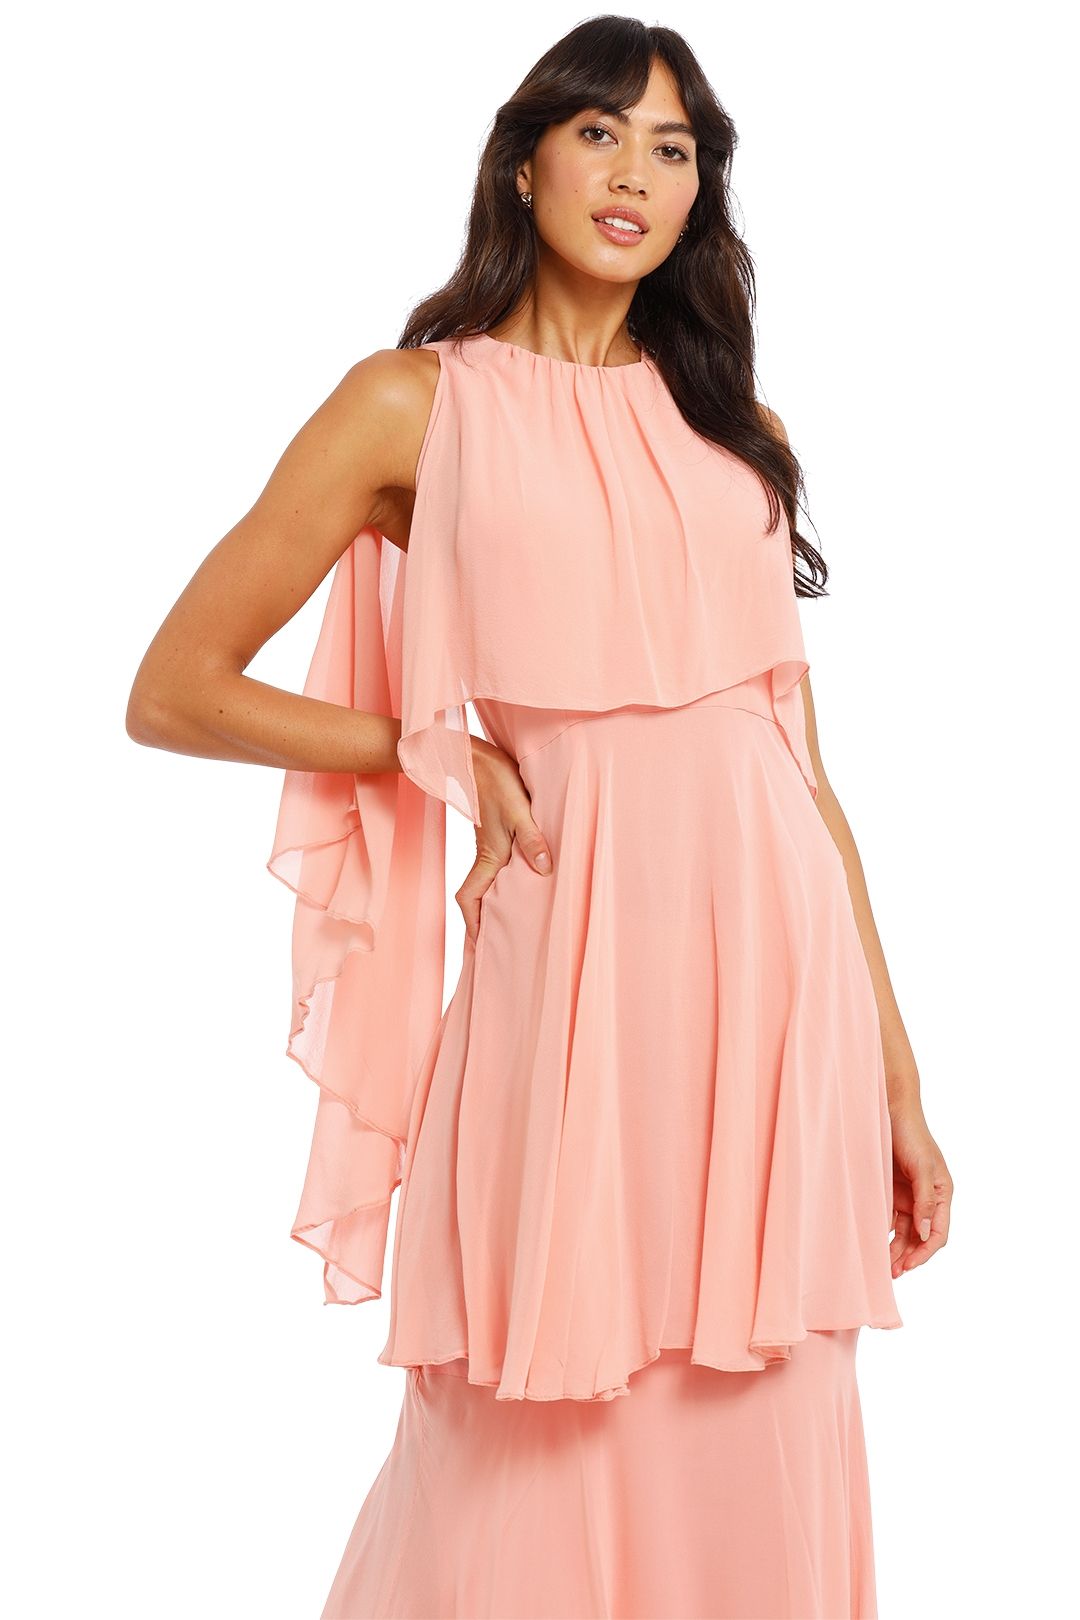 Ginger and Smart Dream Gown Sherbert Pink Fit and Flare